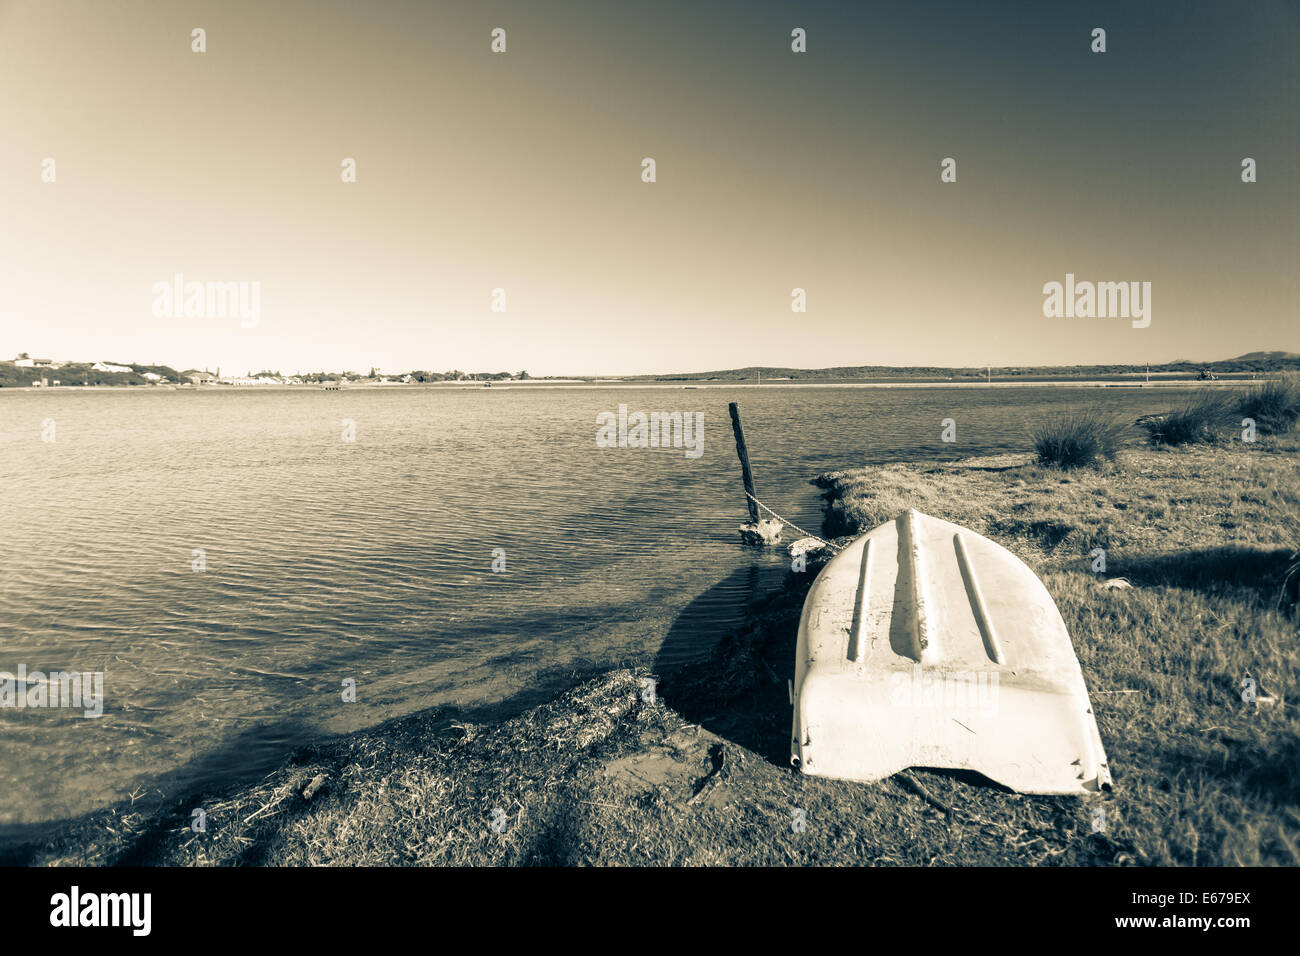 Boat upside down abandoned next to large river lagoon in vintage sepia landscape Stock Photo